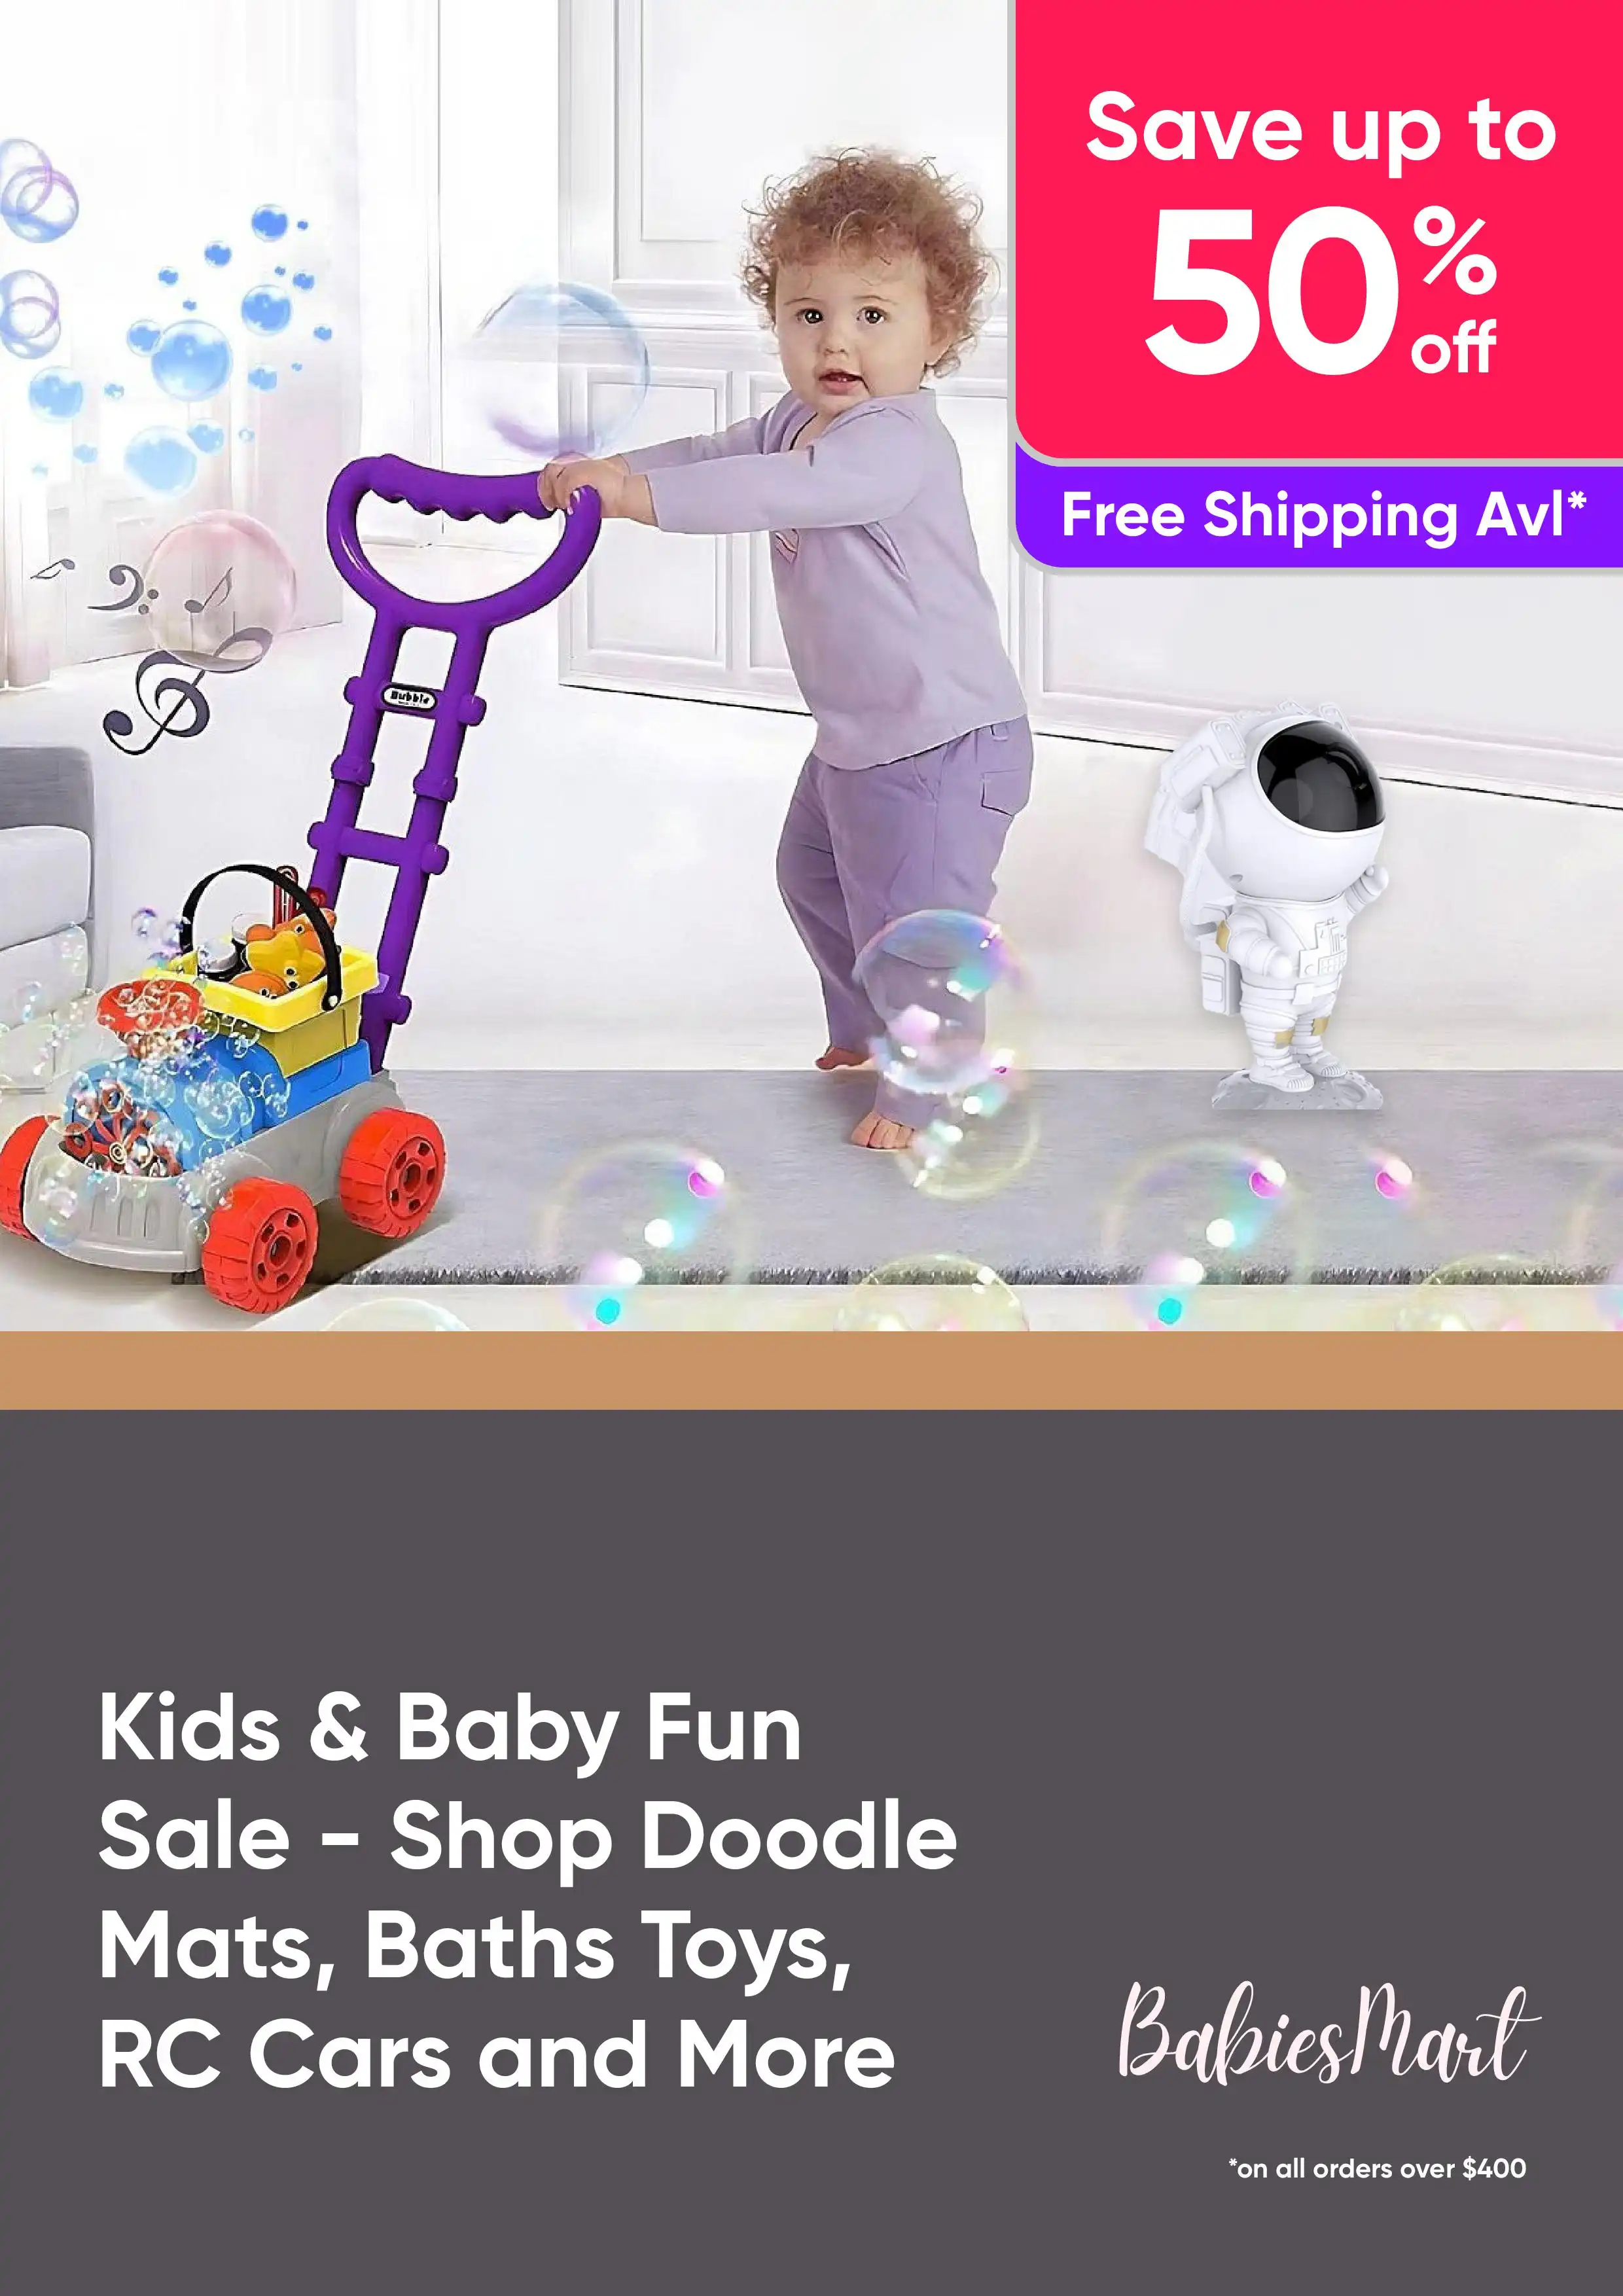 Kids & Baby Fun Sale - Shop Doodle Mats, Baths Toys, RC Cars and More